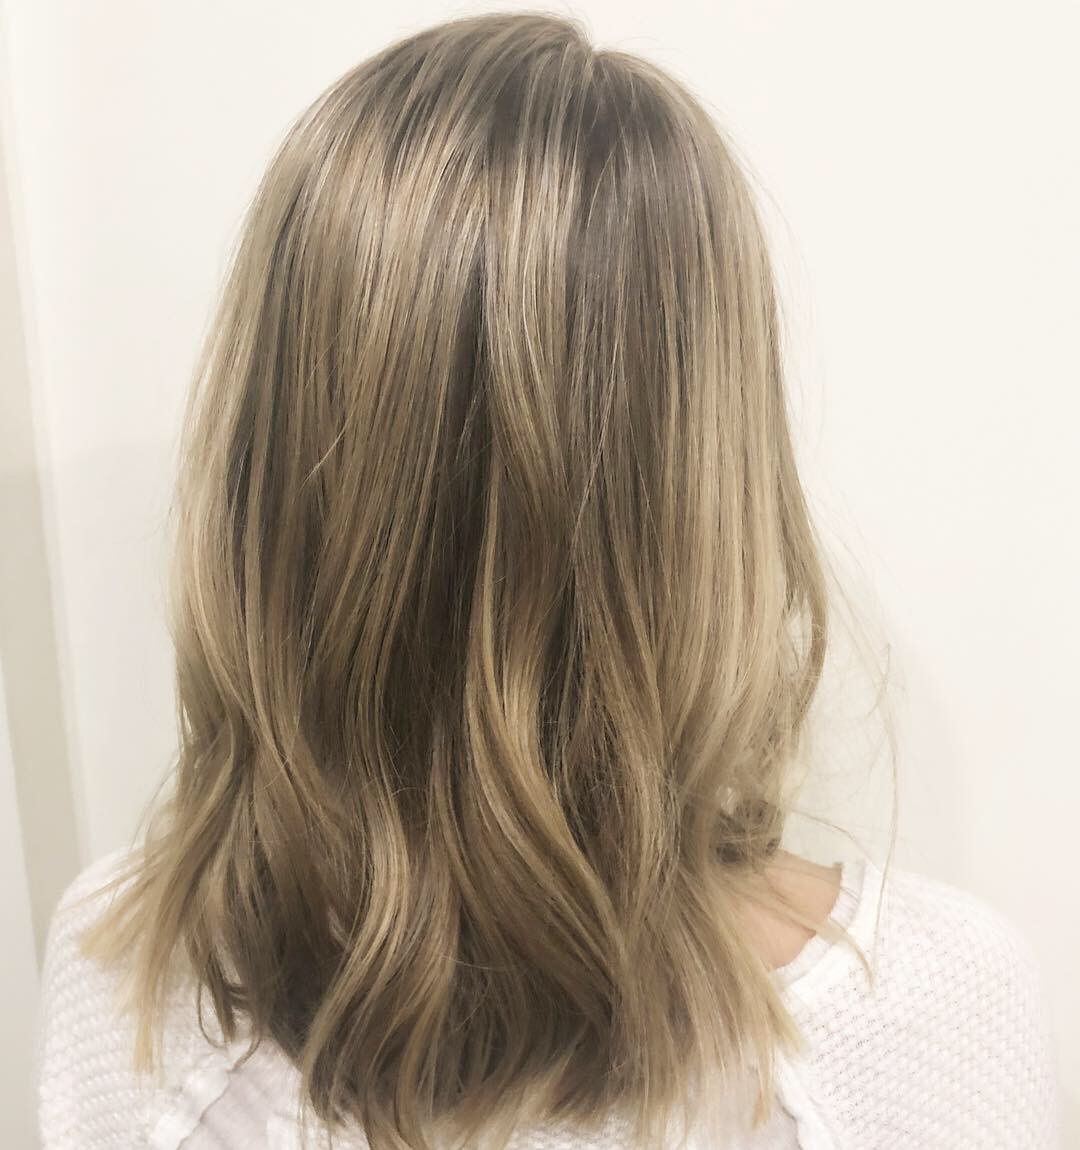 Blonde dimension + Cut Refresh by Pelo Artist Sarah!
Swipe ⬅️ for the before!
.
Call 763.324.7129 to book your appointment 
.
.
.
#pelosalonspa #shareaveda #aveda #avedacolor #avedaartists #crueltyfree #color #blondebalayage #dimension #mn #minnesota #coonrapids #mnhair #mnsalons